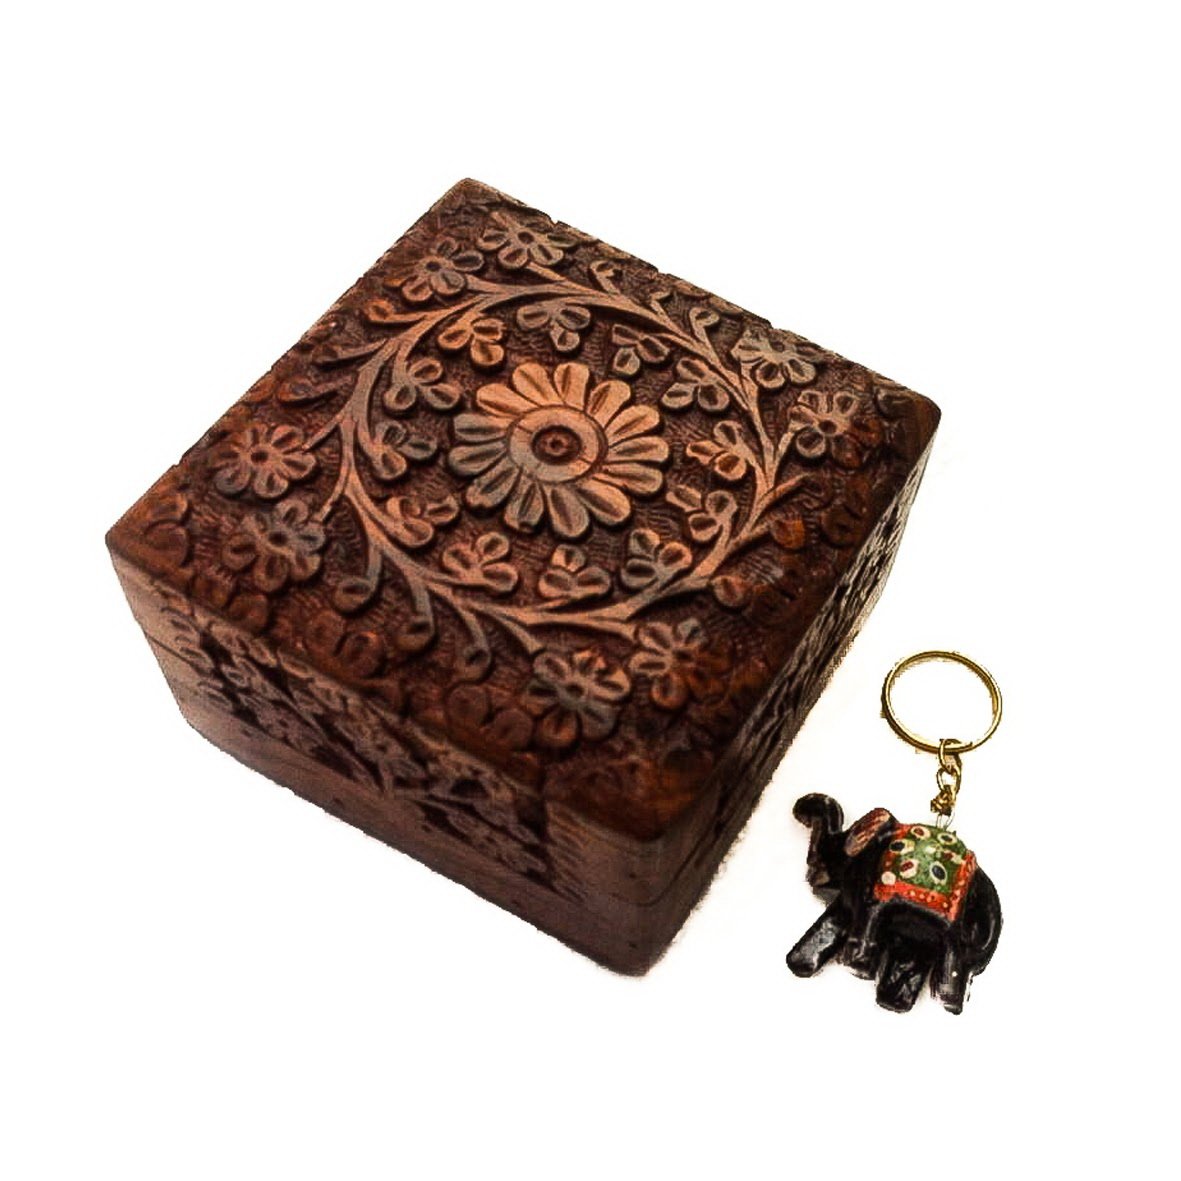 Artncraft Jewelry Box Novelty Item, Unique Artisan Traditional Hand Carved Rosewood Jewelry Box From India Inside